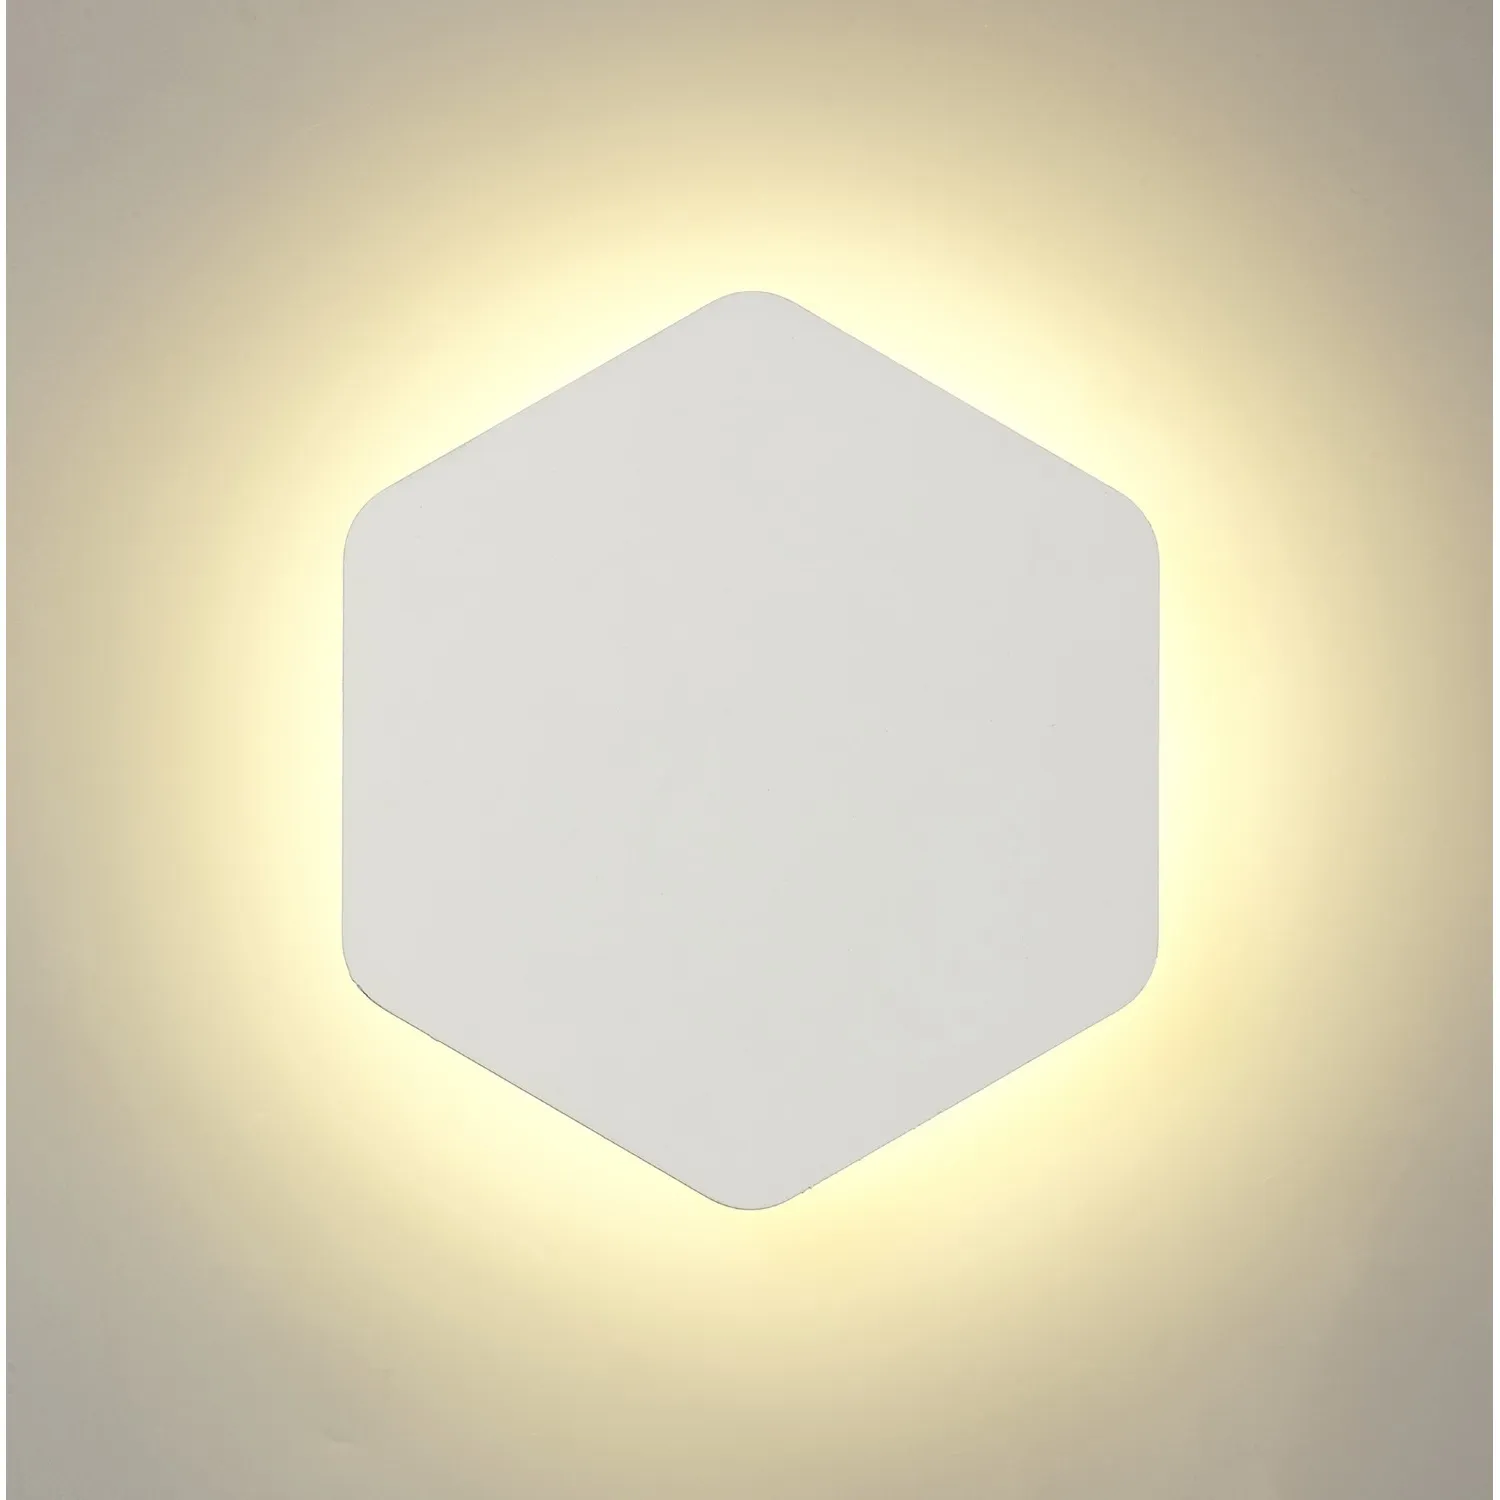 Edgware Magnetic Base Wall Lamp, 12W LED 3000K 498lm, 20 19cm Vertical Hexagonal Centre, Sand White Acrylic Frosted Diffuser